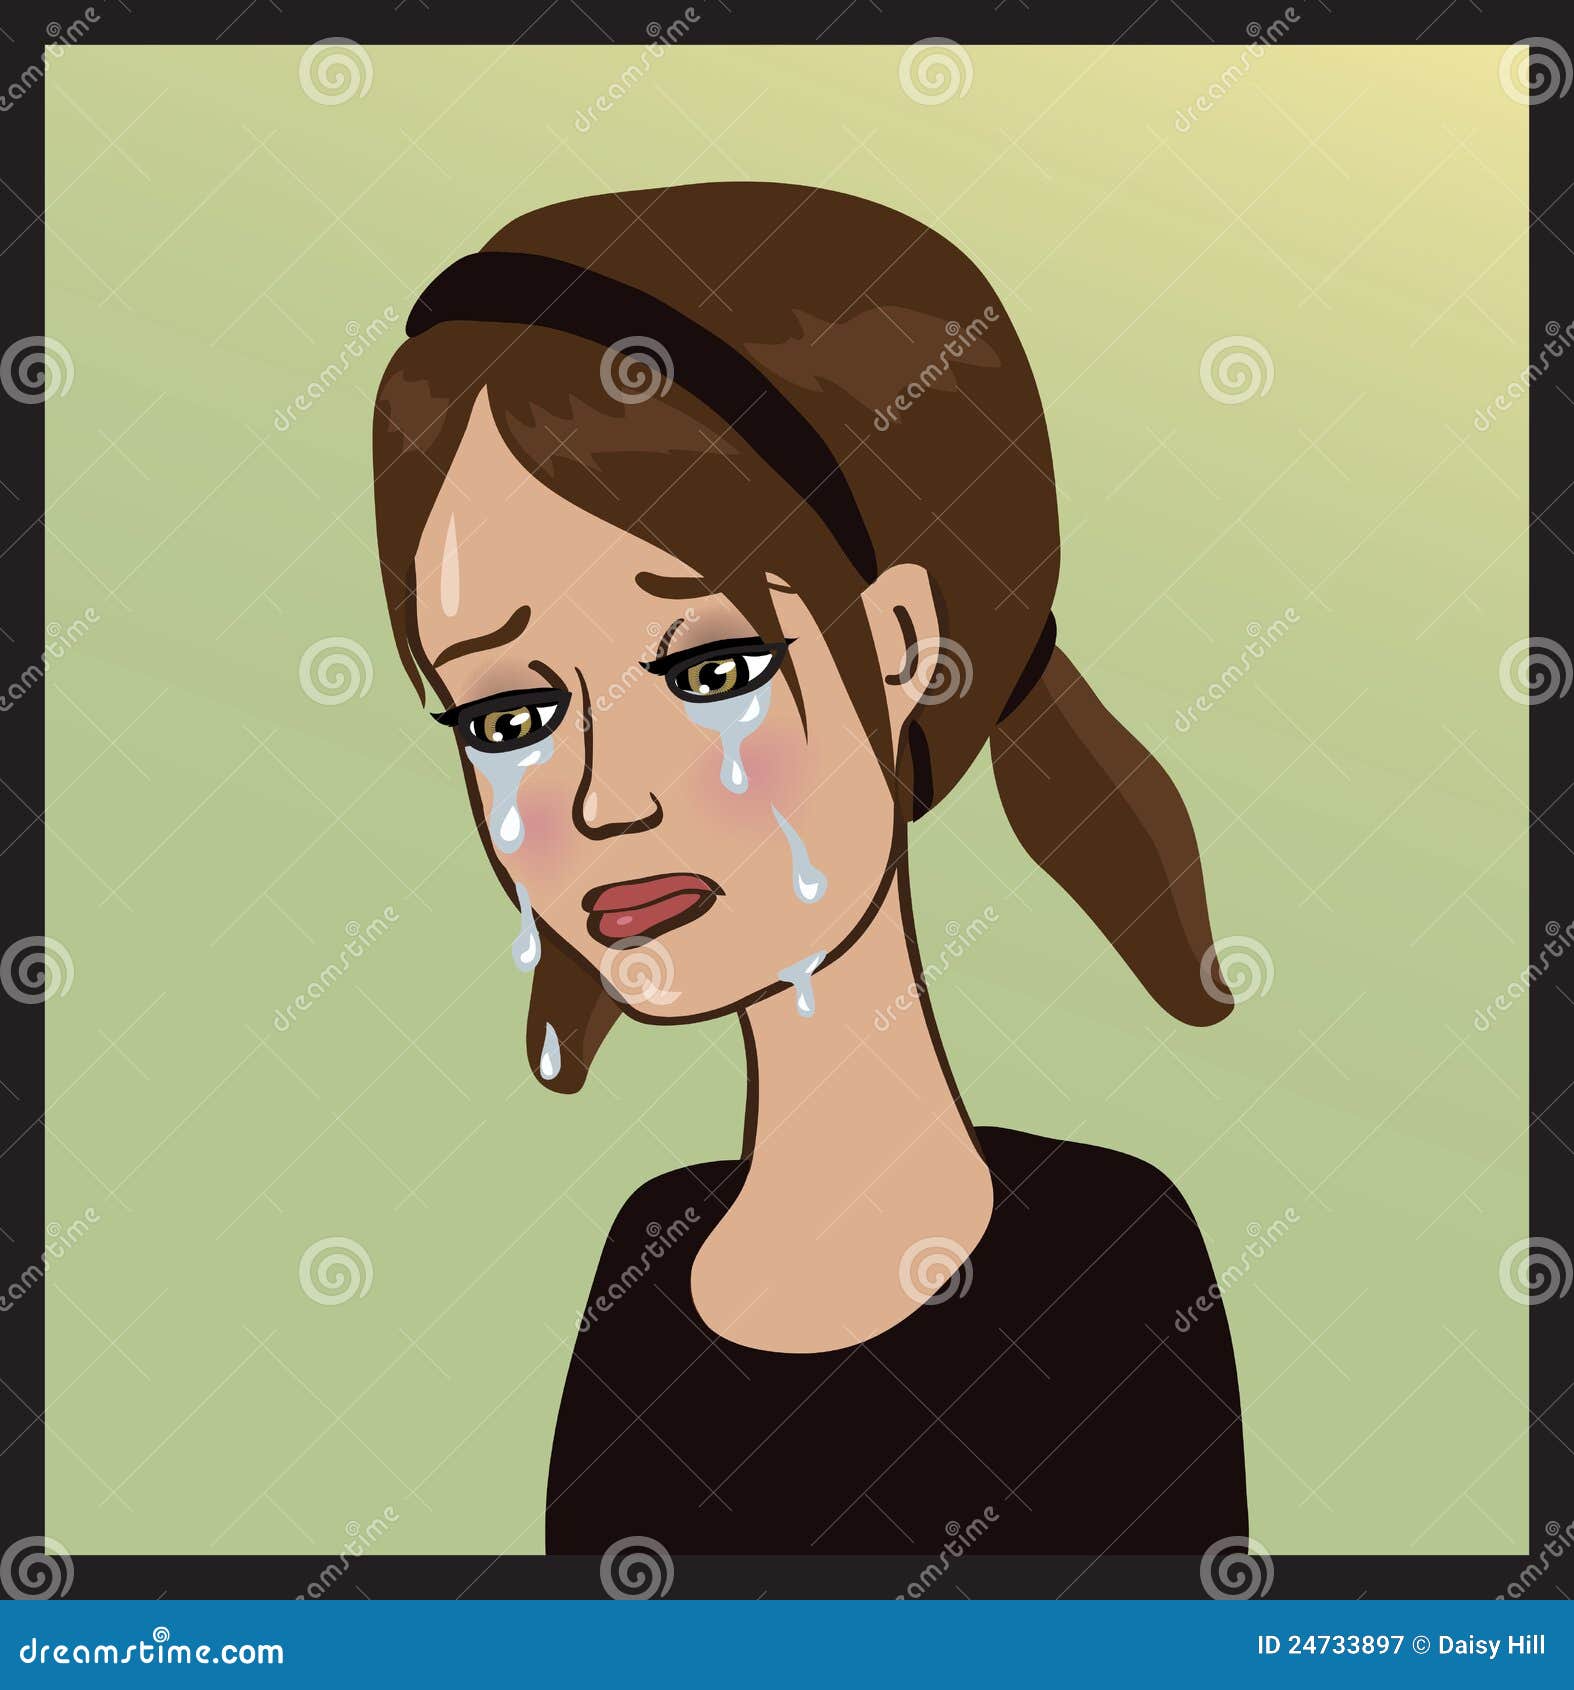 clipart of girl crying - photo #40